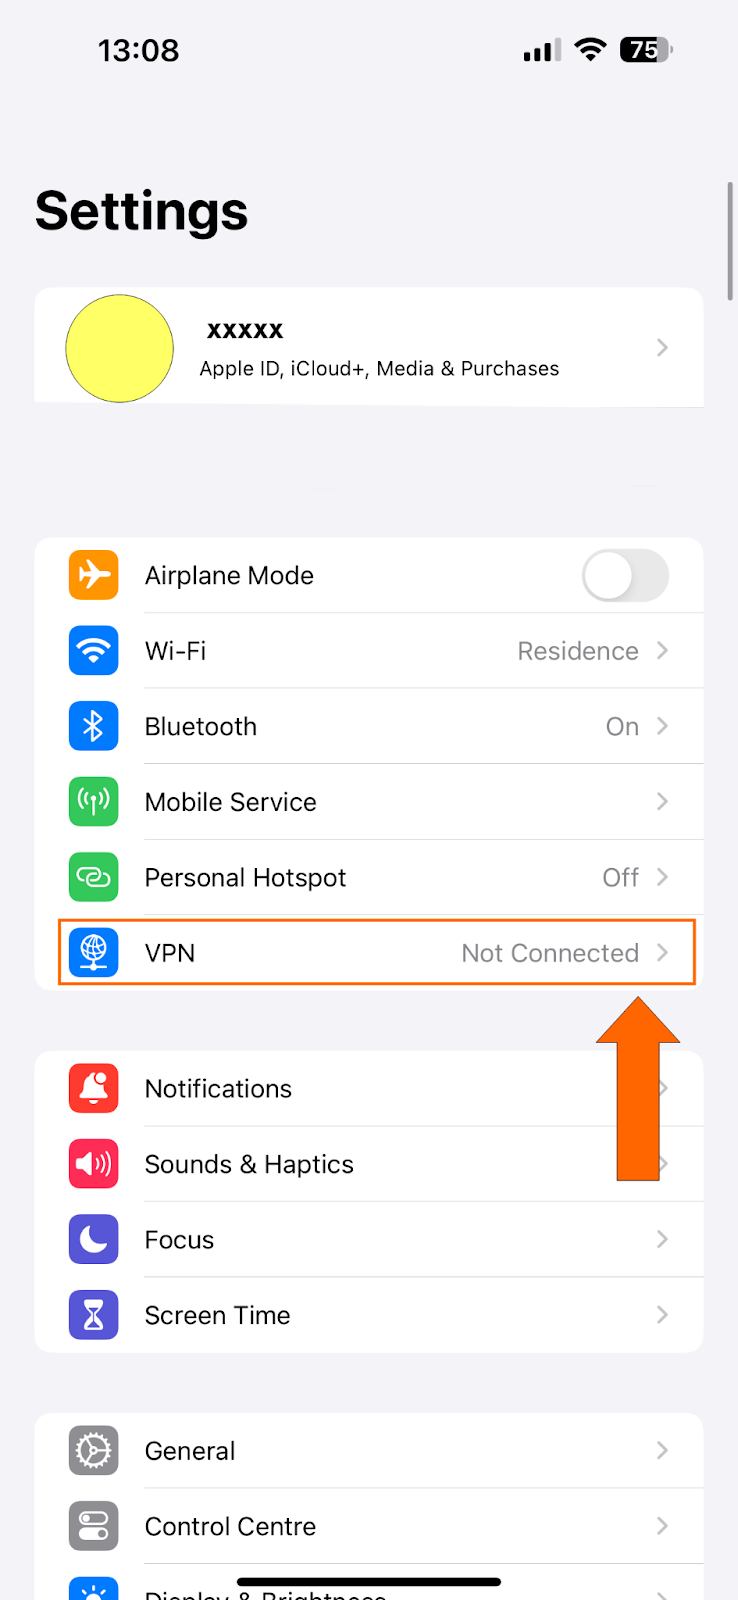 Settings menu for iOS with VPN highlighted.